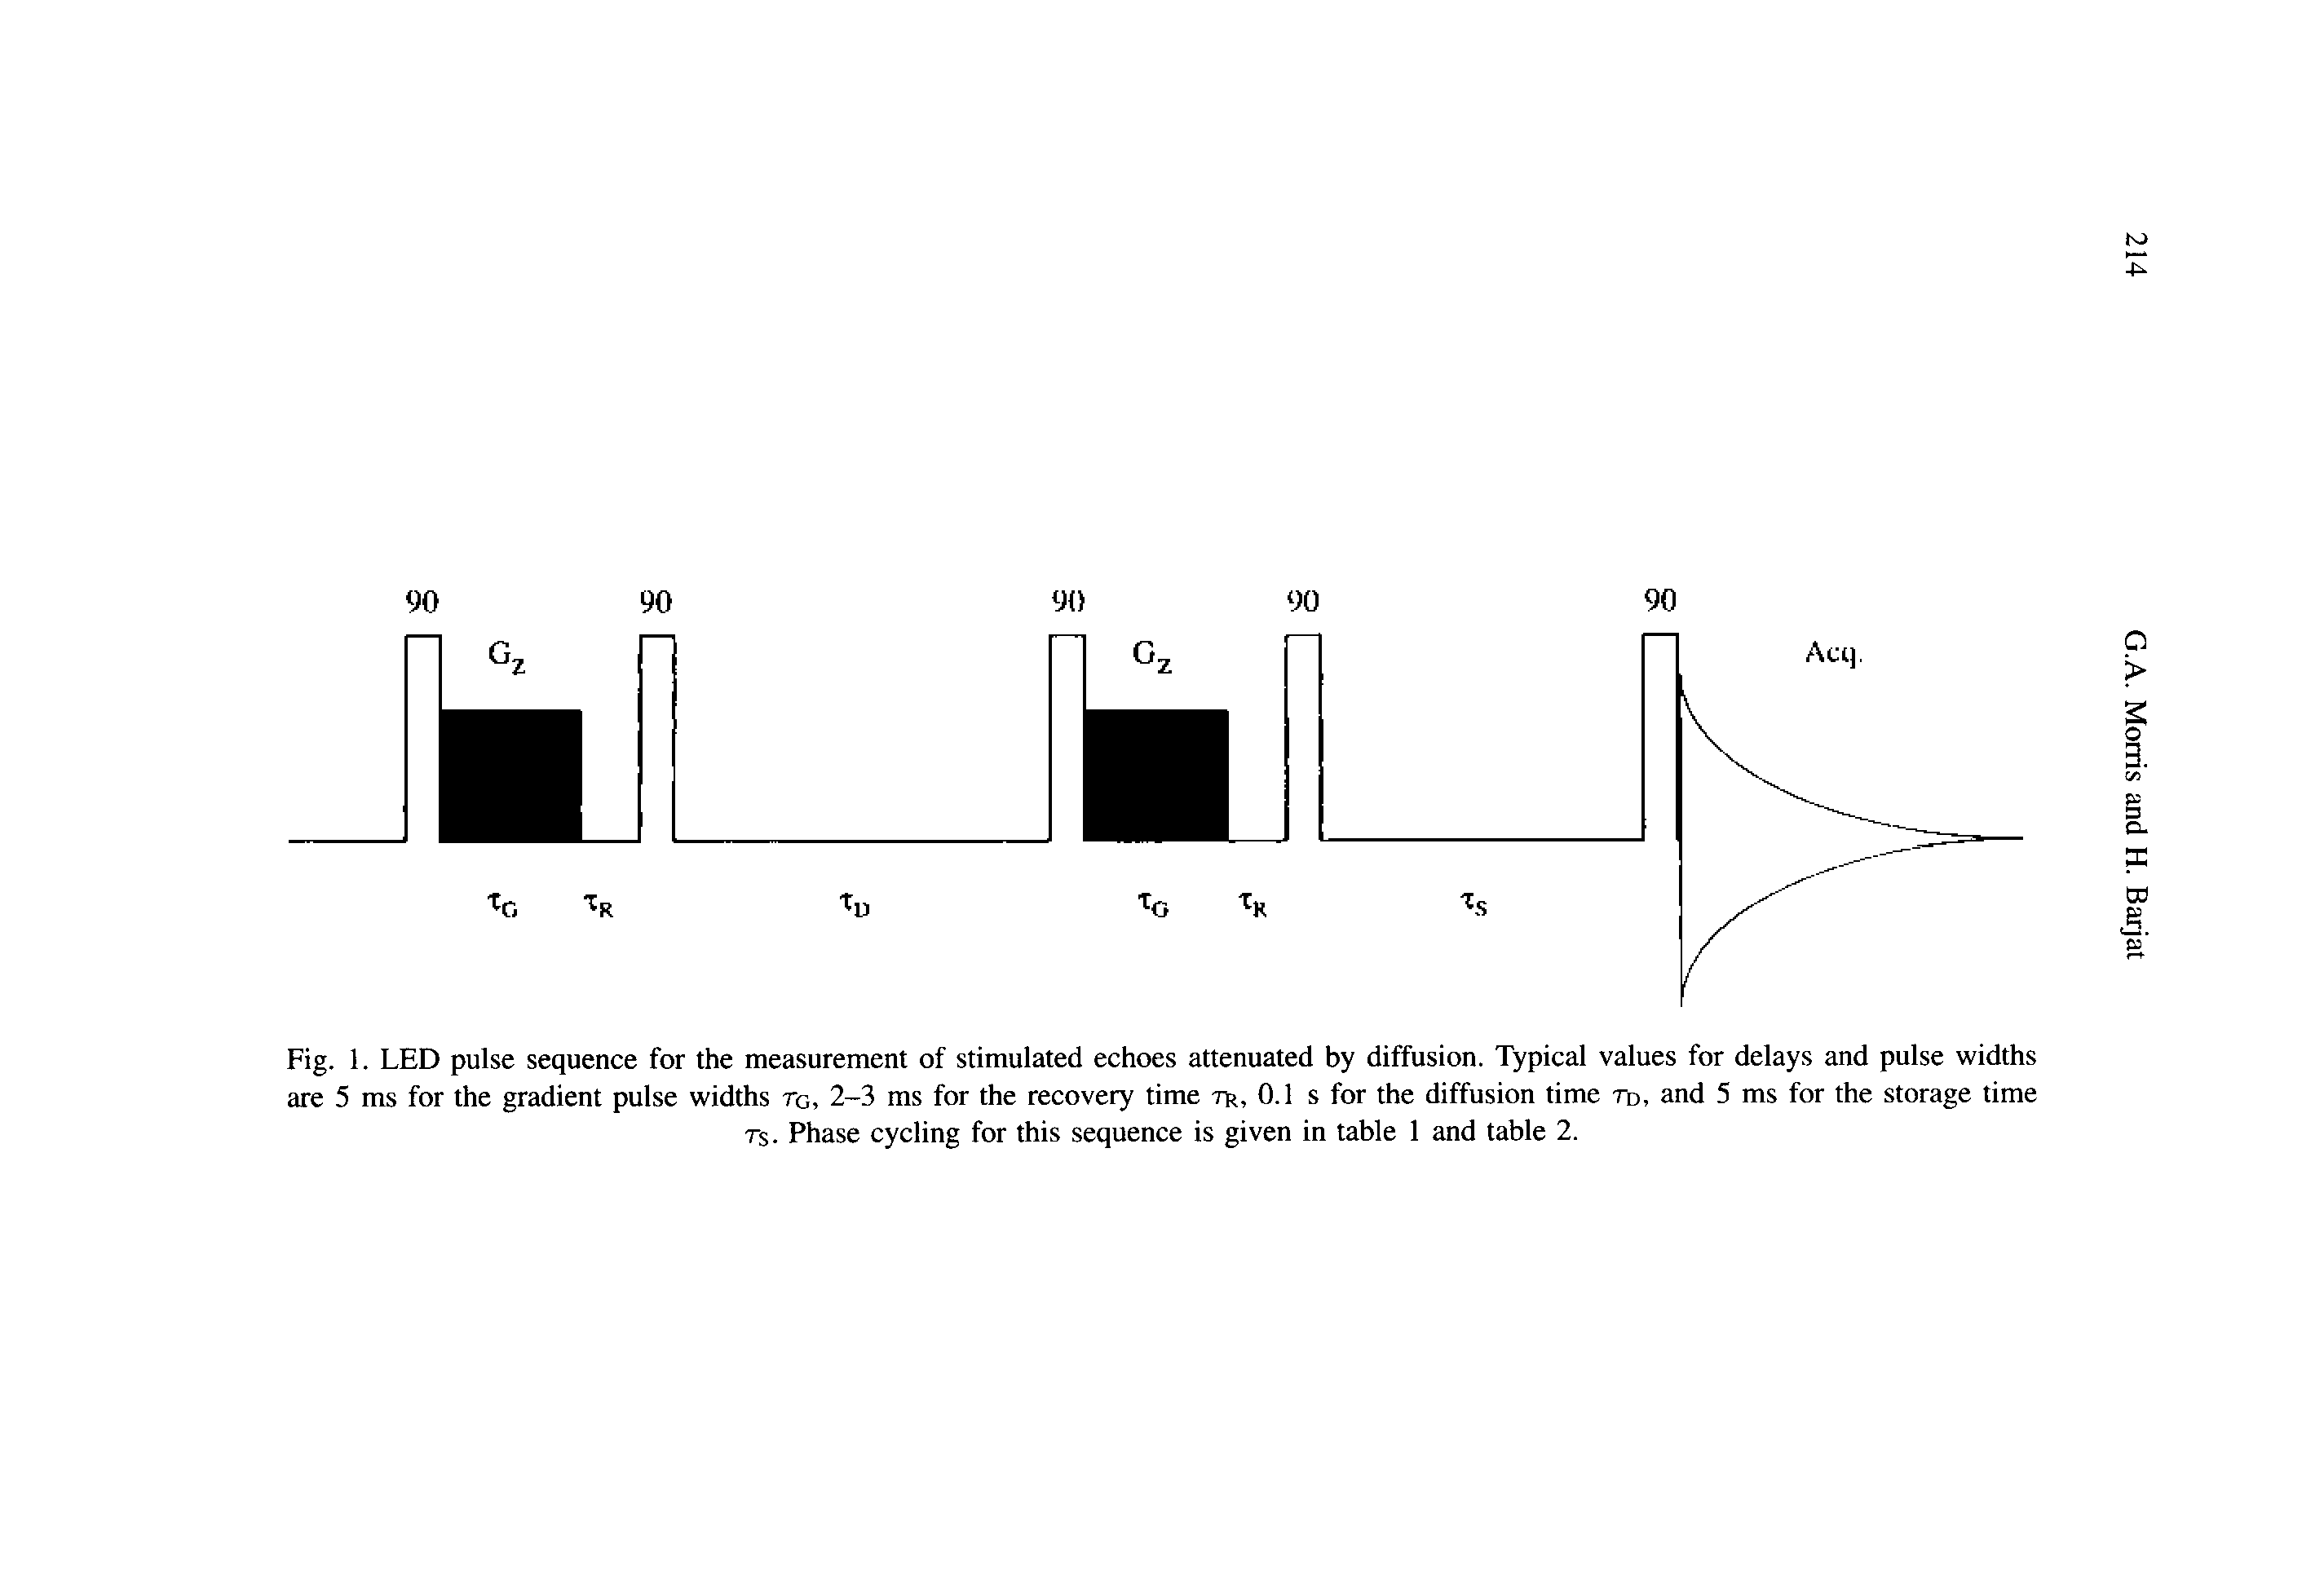 Fig. 1. LED pulse sequence for the measurement of stimulated echoes attenuated by diffusion. Typical values for delays and pulse widths are 5 ms for the gradient pulse widths tg, 2-3 ms for the recovery time tr, 0.1 s for the diffusion time td, and 5 ms for the storage time...